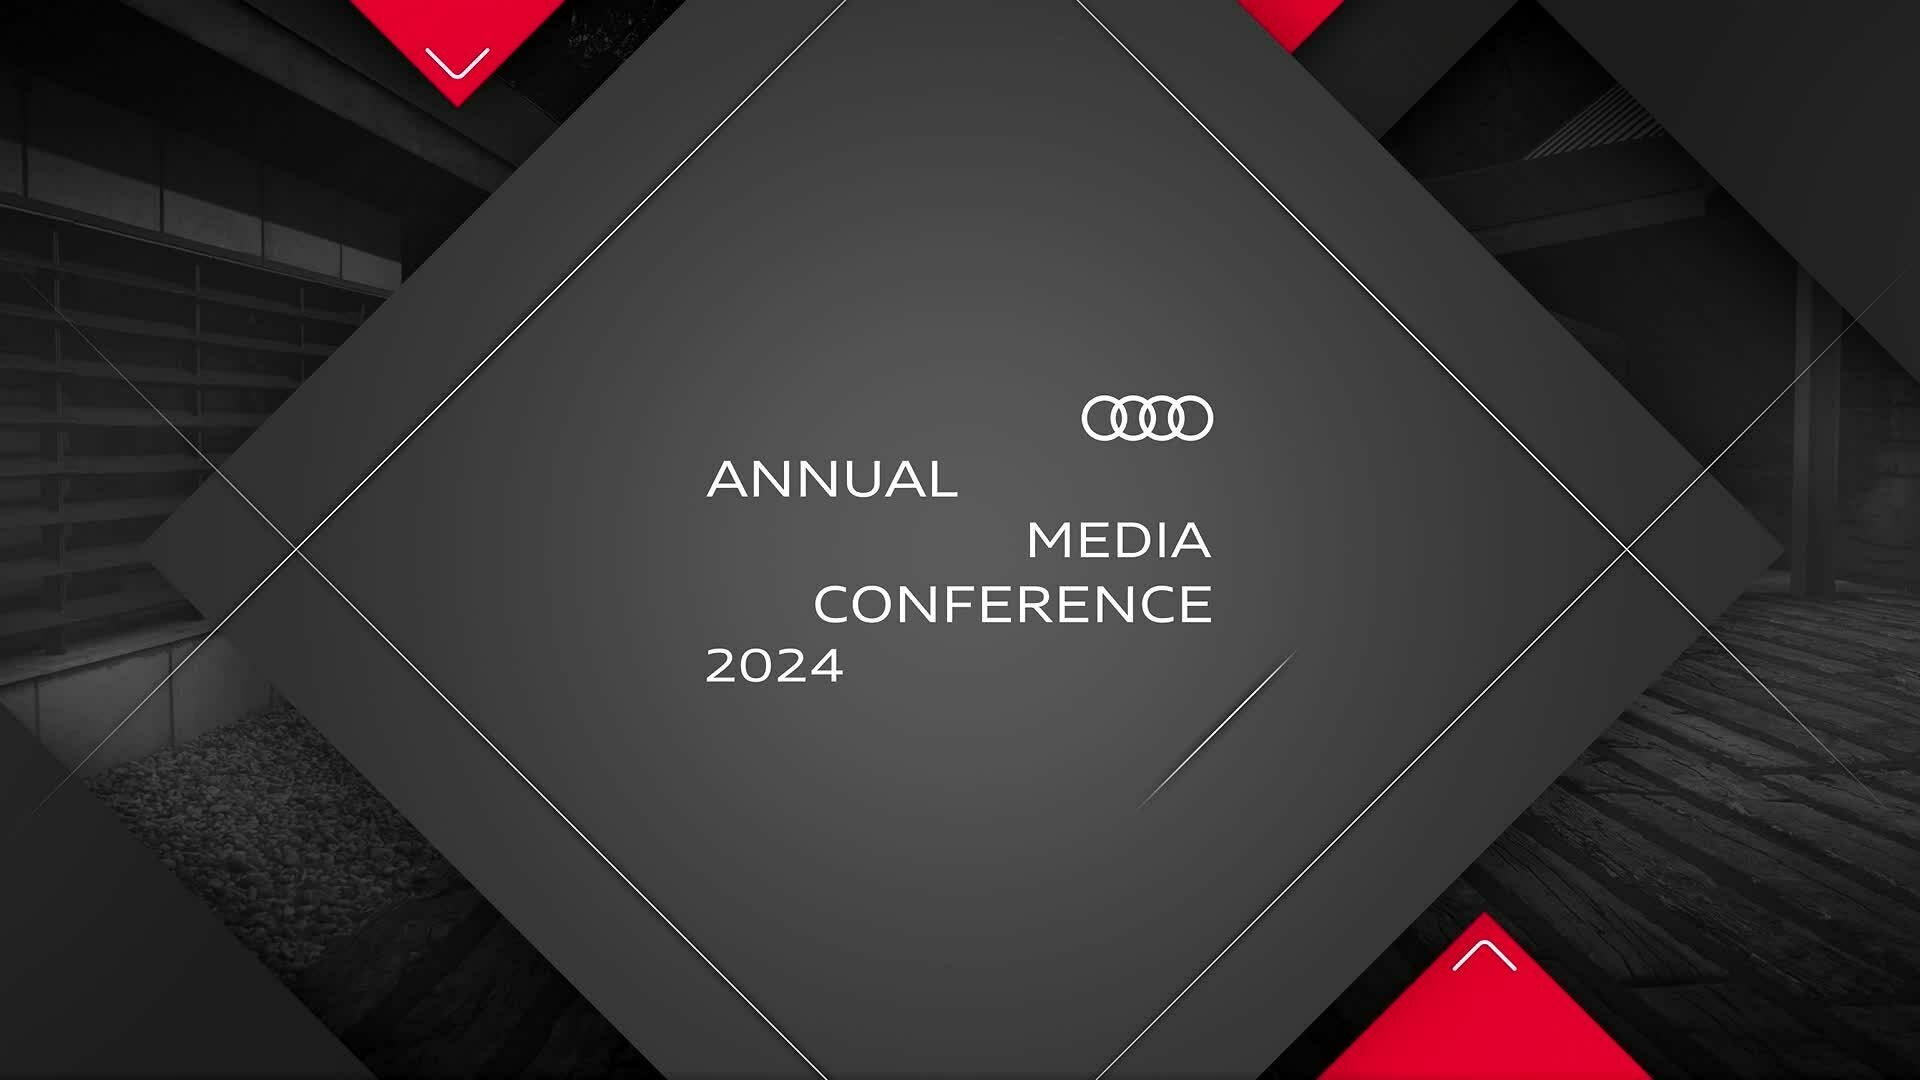 Annual Media Conference 2024 of AUDI AG